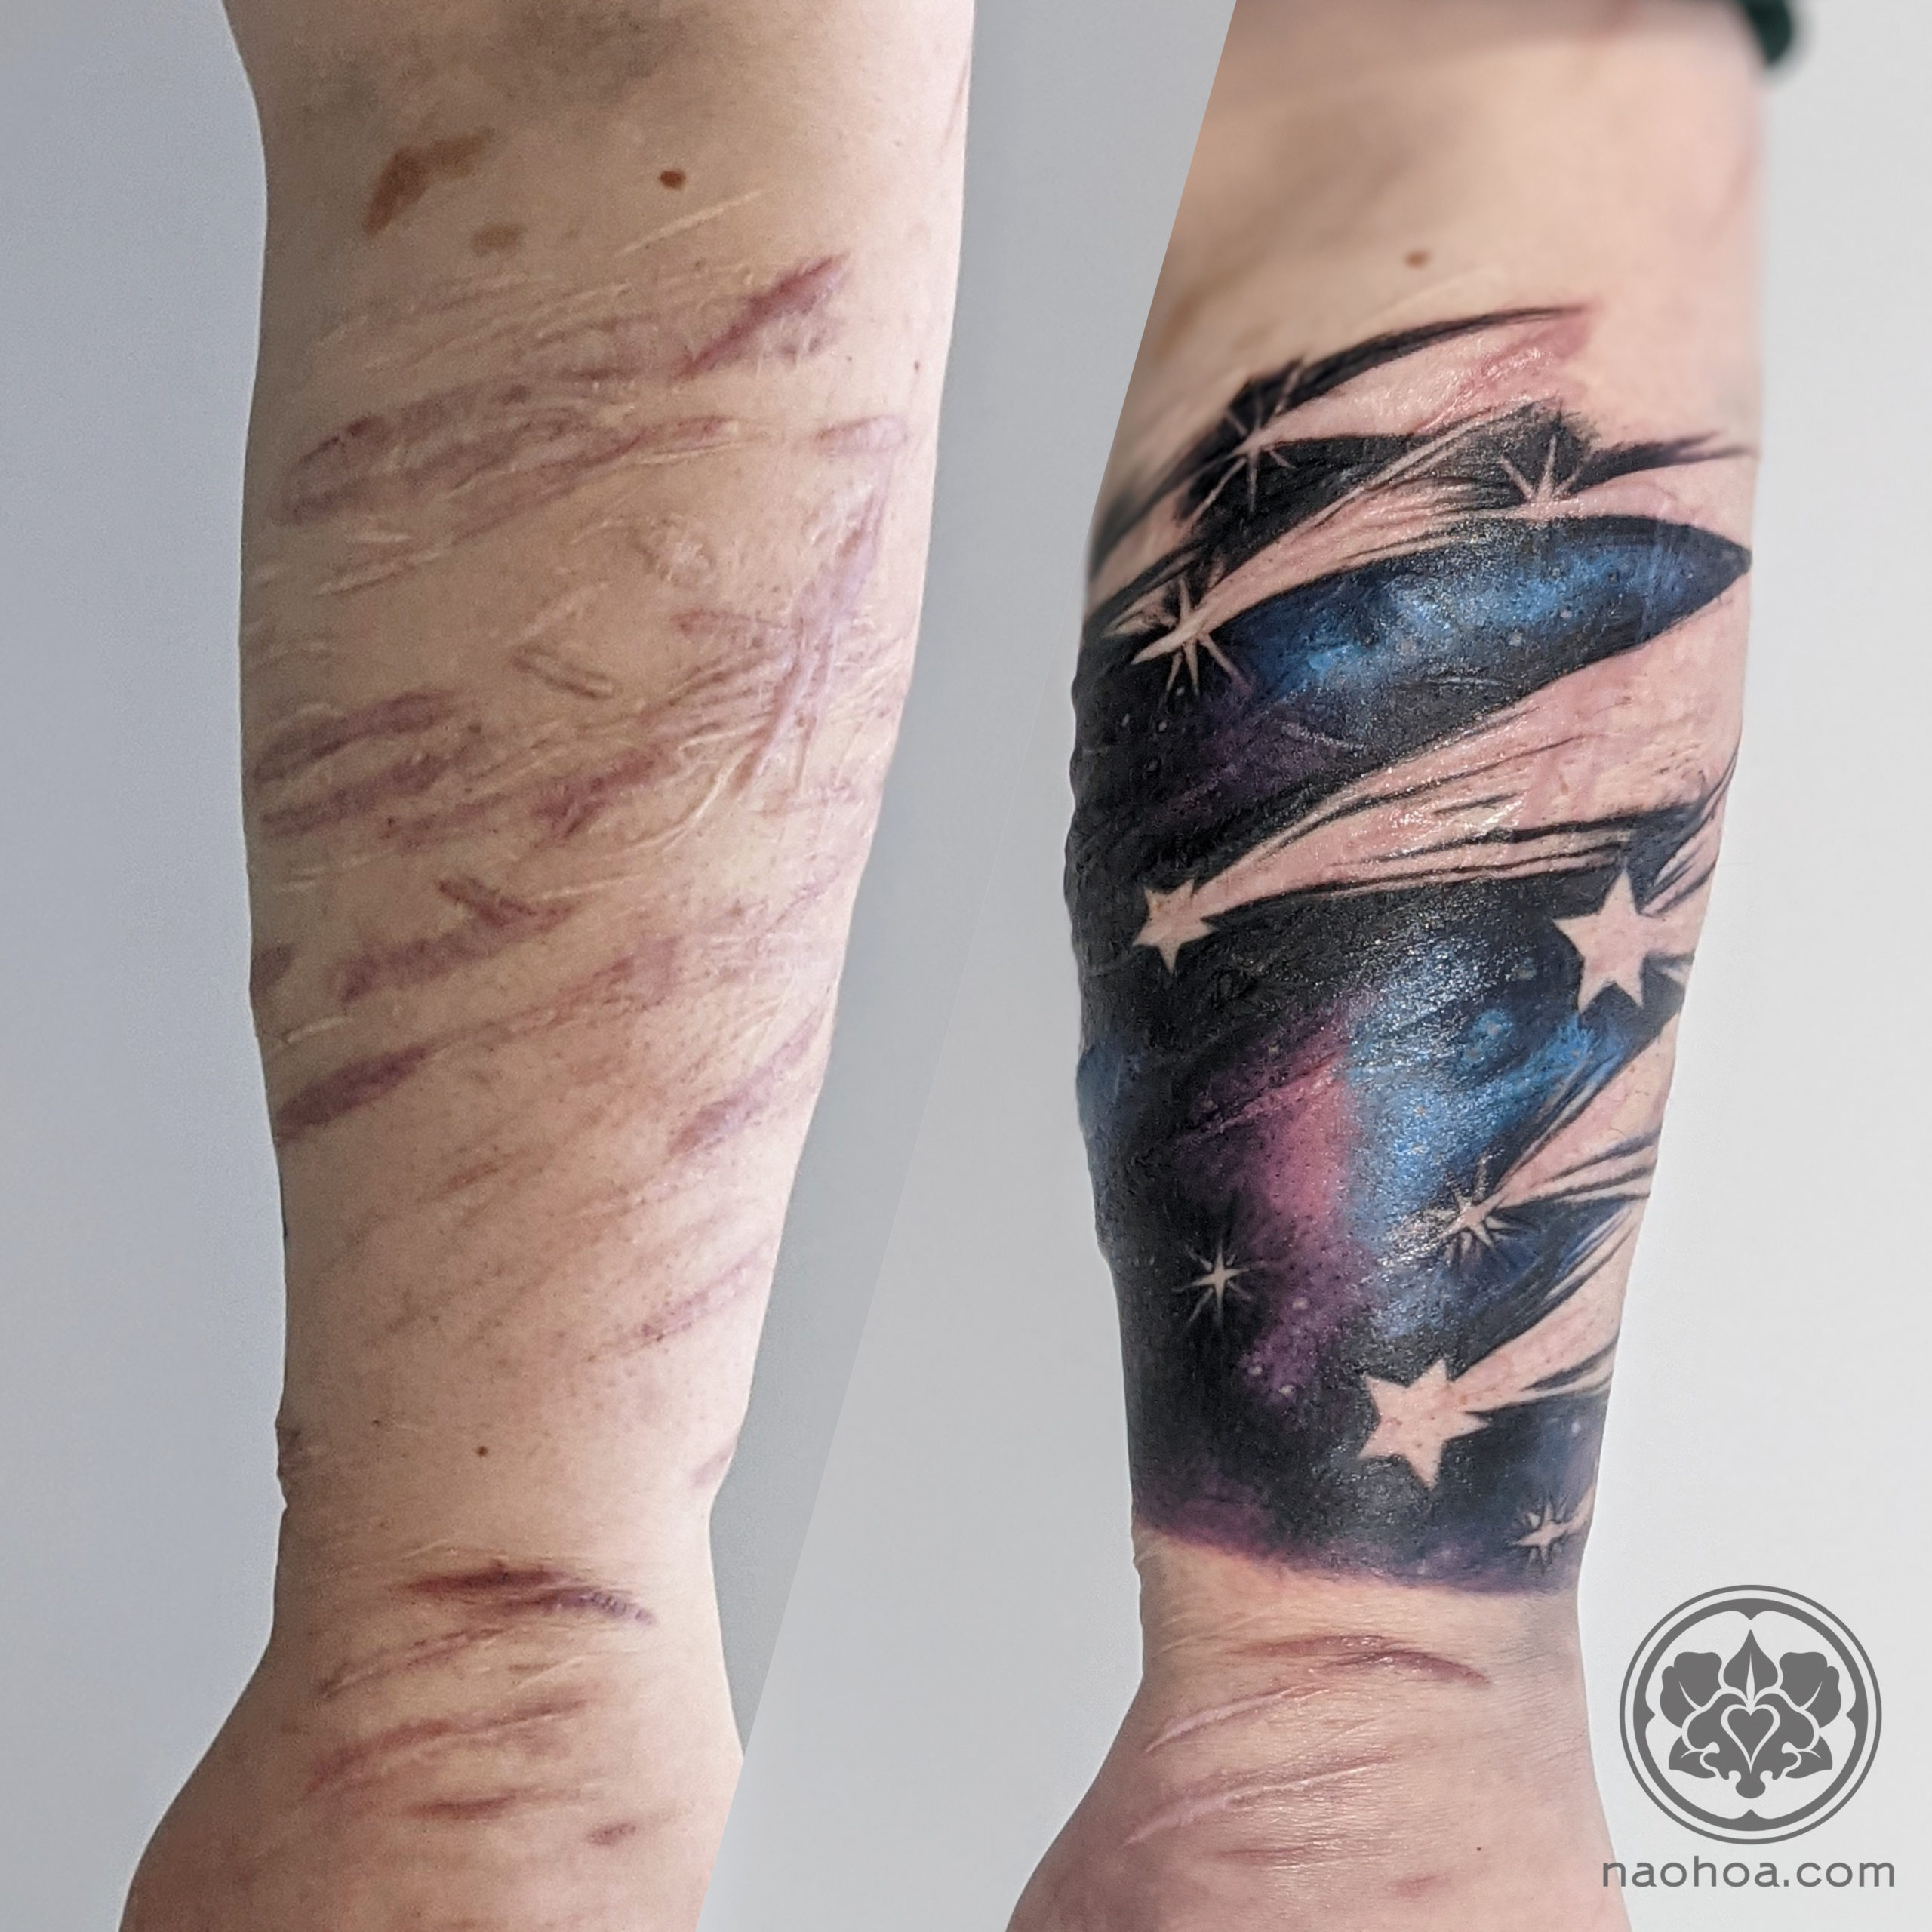 Can You Get A Tattoo Over Scars? 